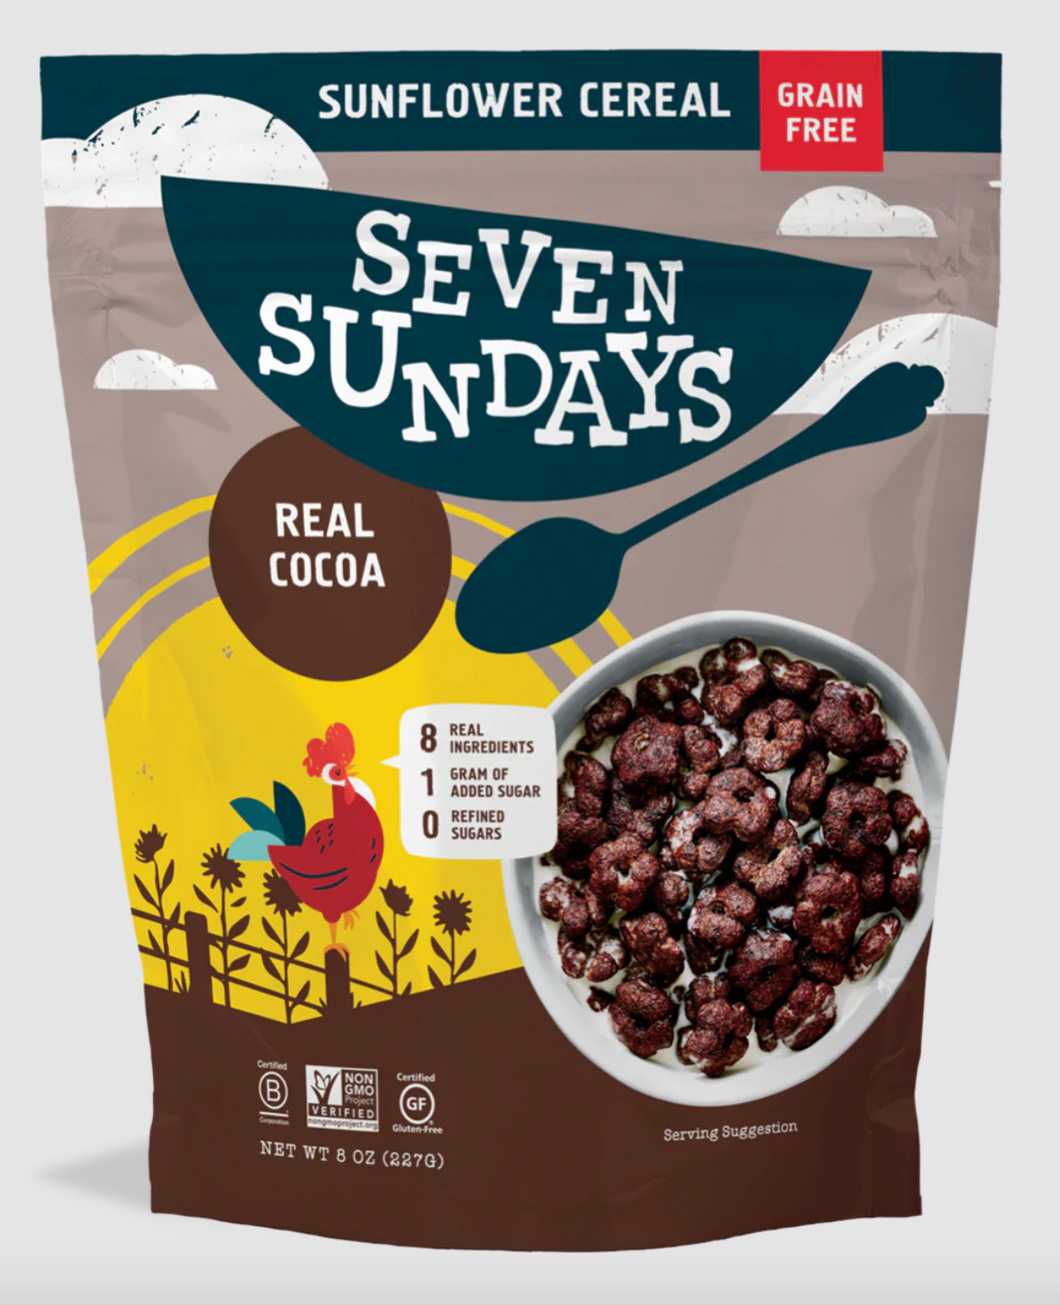 Seven Sundays Cocoa Sunflower Cereal